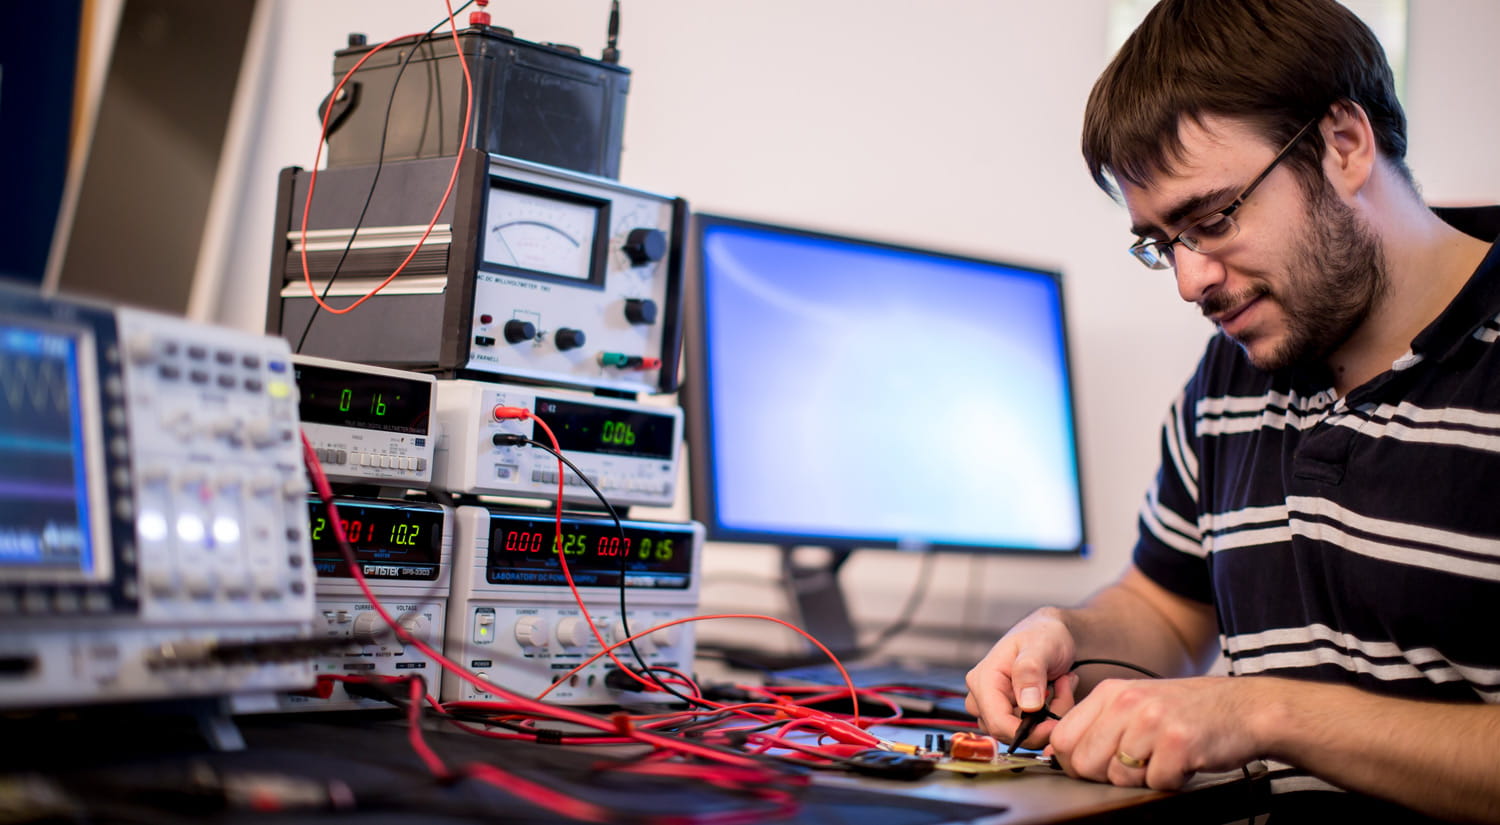 A student in an electronic labs working with equipment